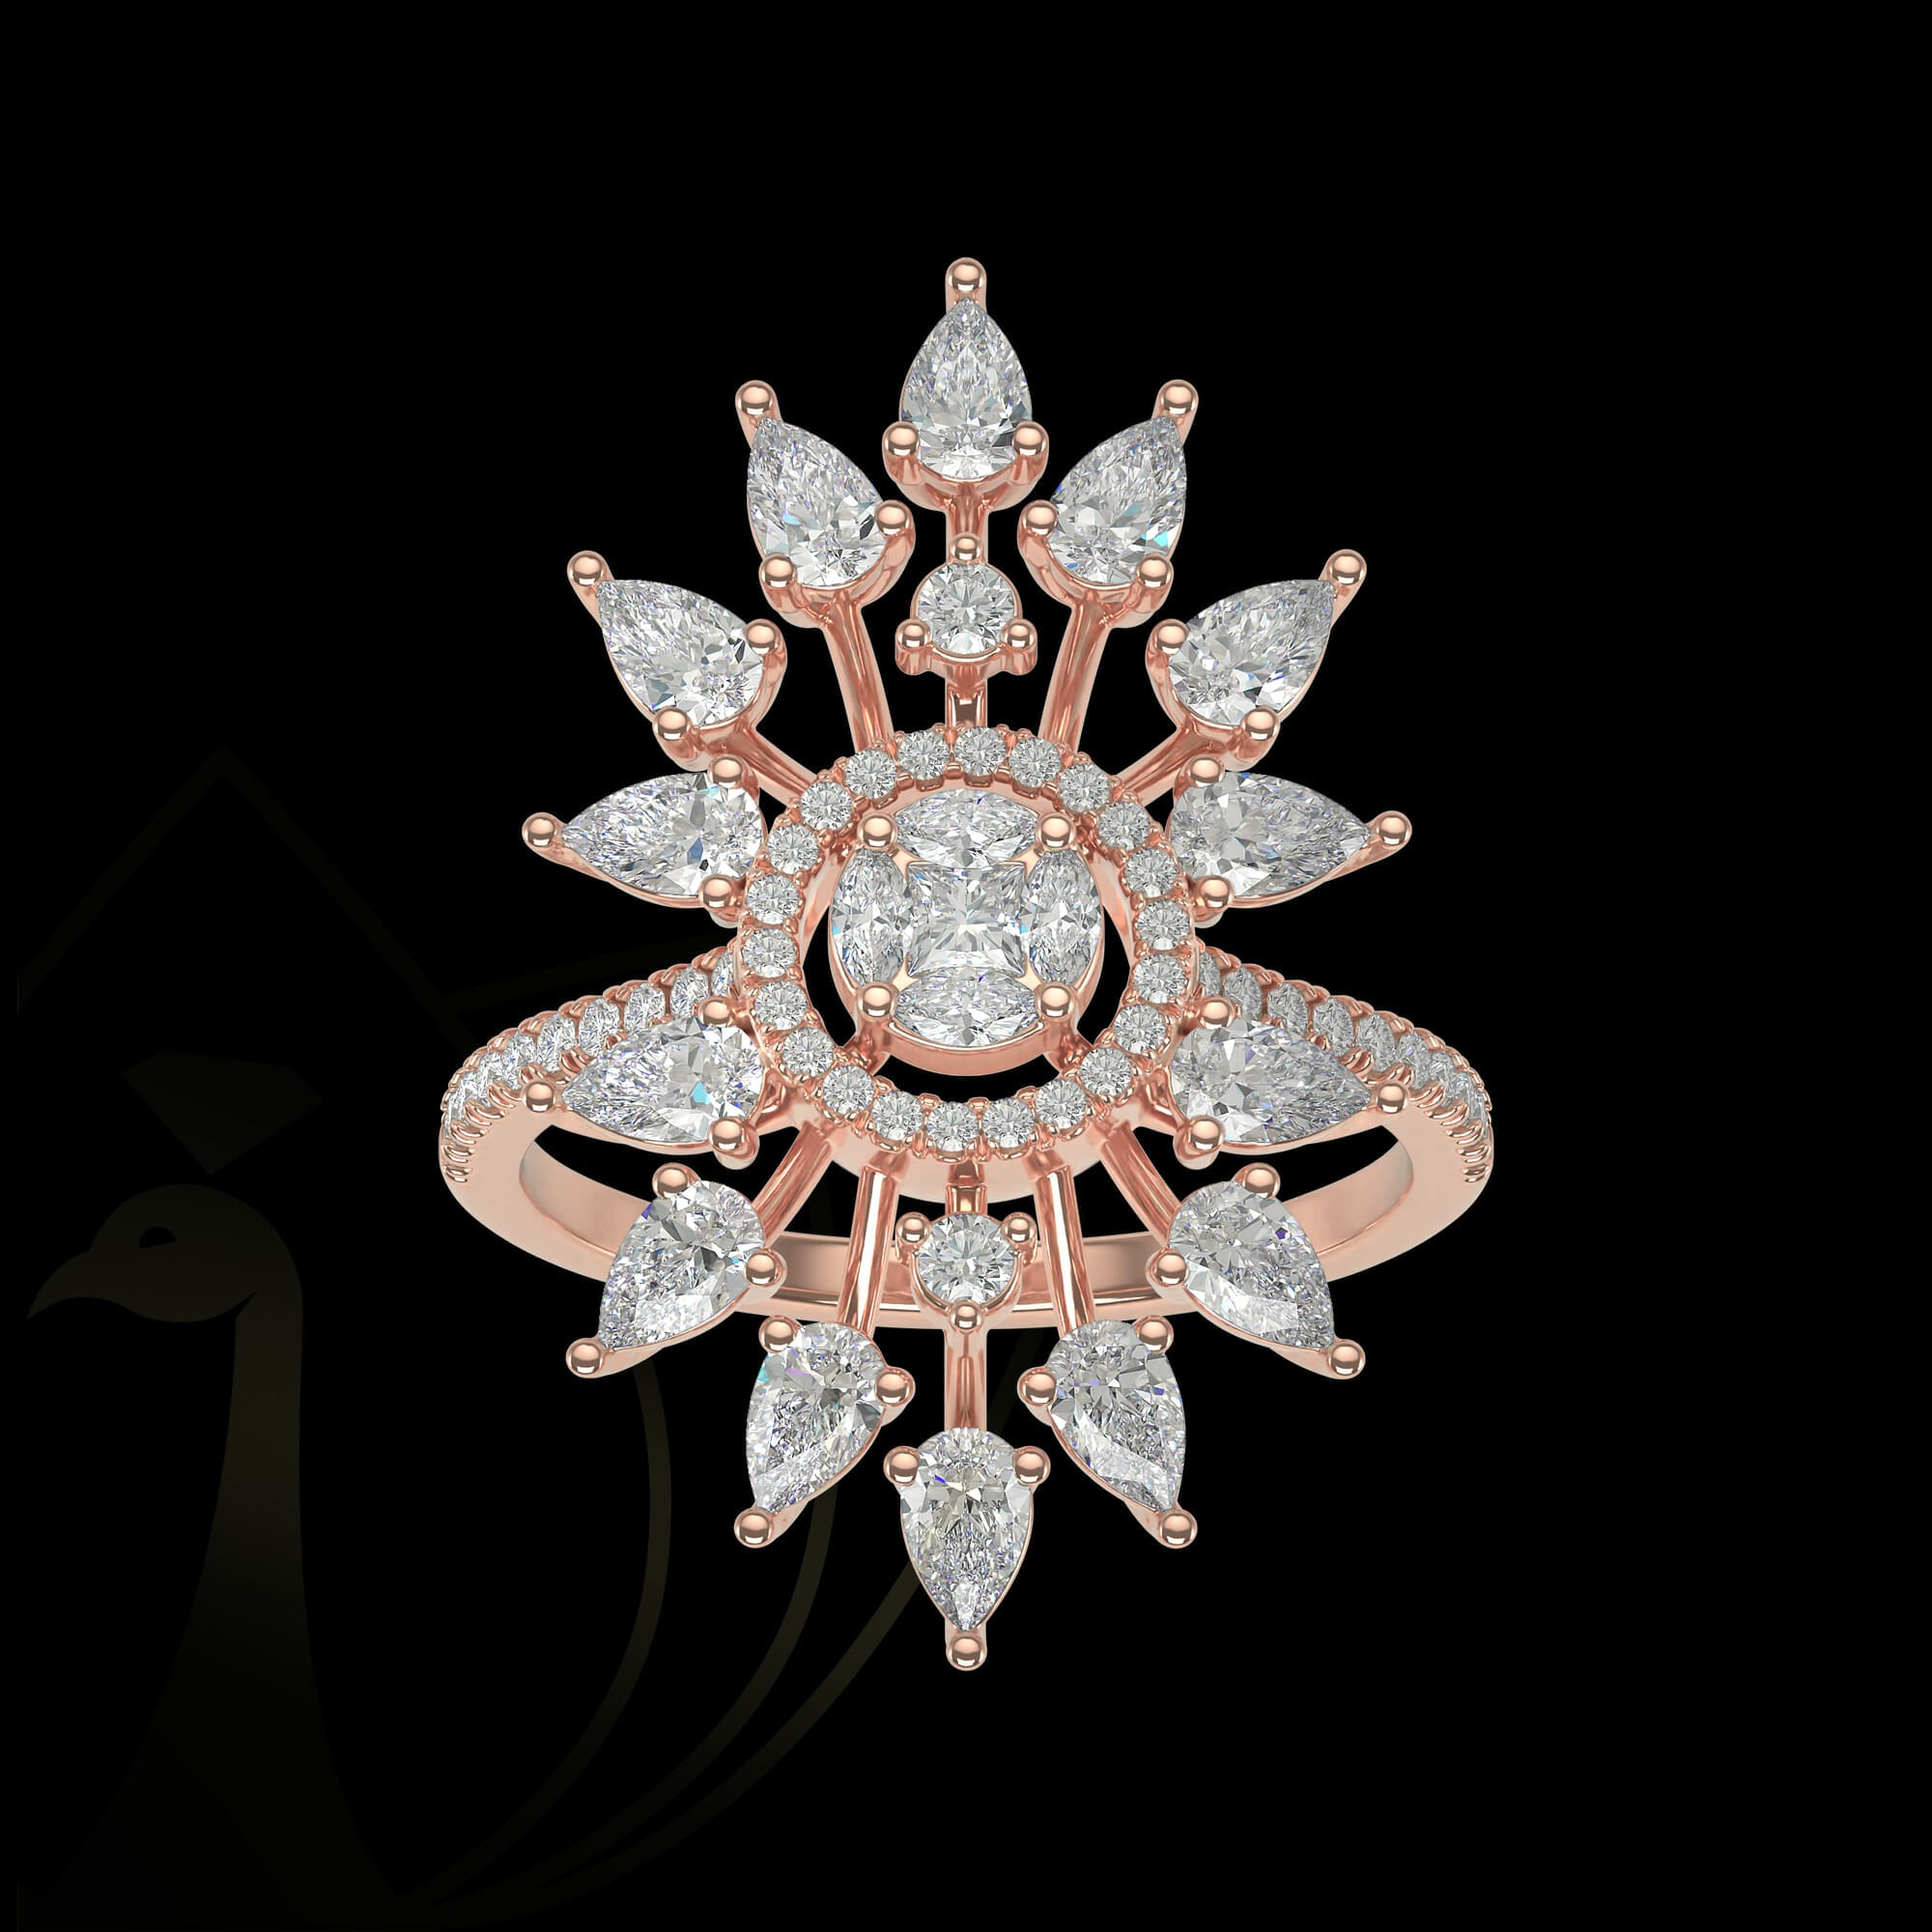 Bountiful Beauty Diamond Ring from our exclusive Gulz Collection